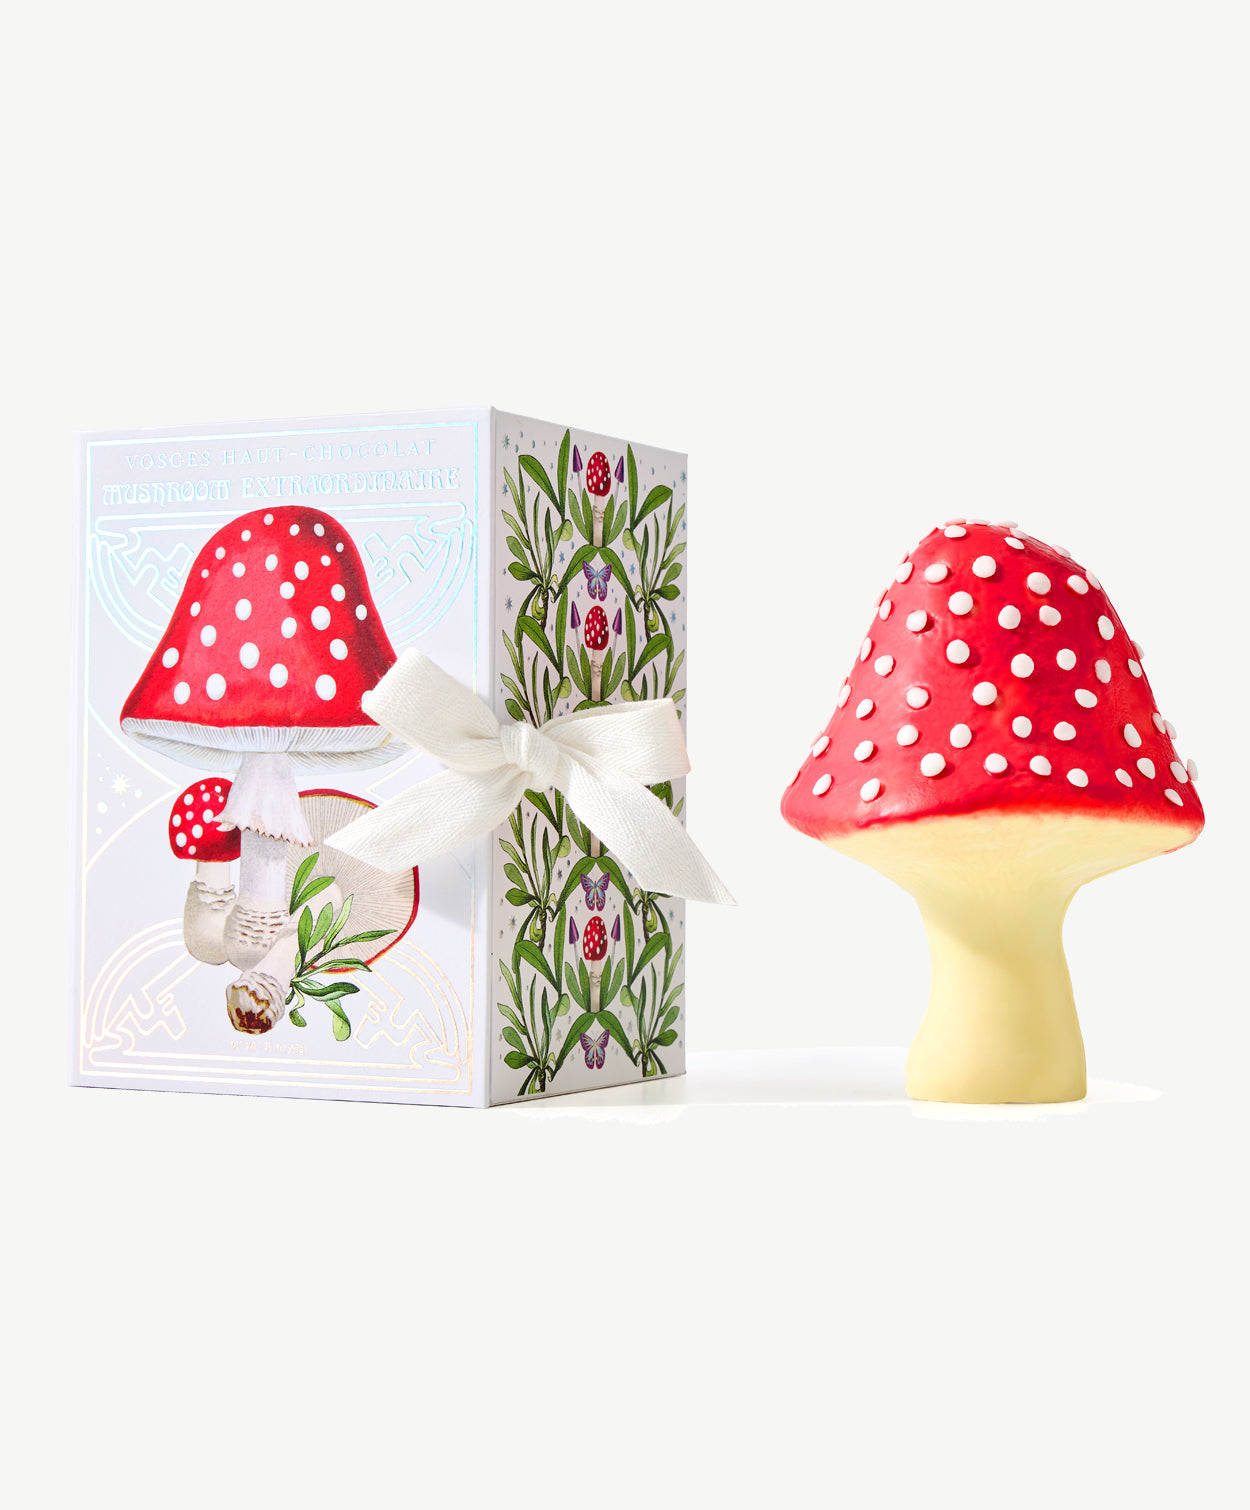 A giant chocolate fly agaric mushroom, red with white polka dots sitting next to a white candy box decorated with red spotted mushrooms, tied with a white ribbon on a white background.